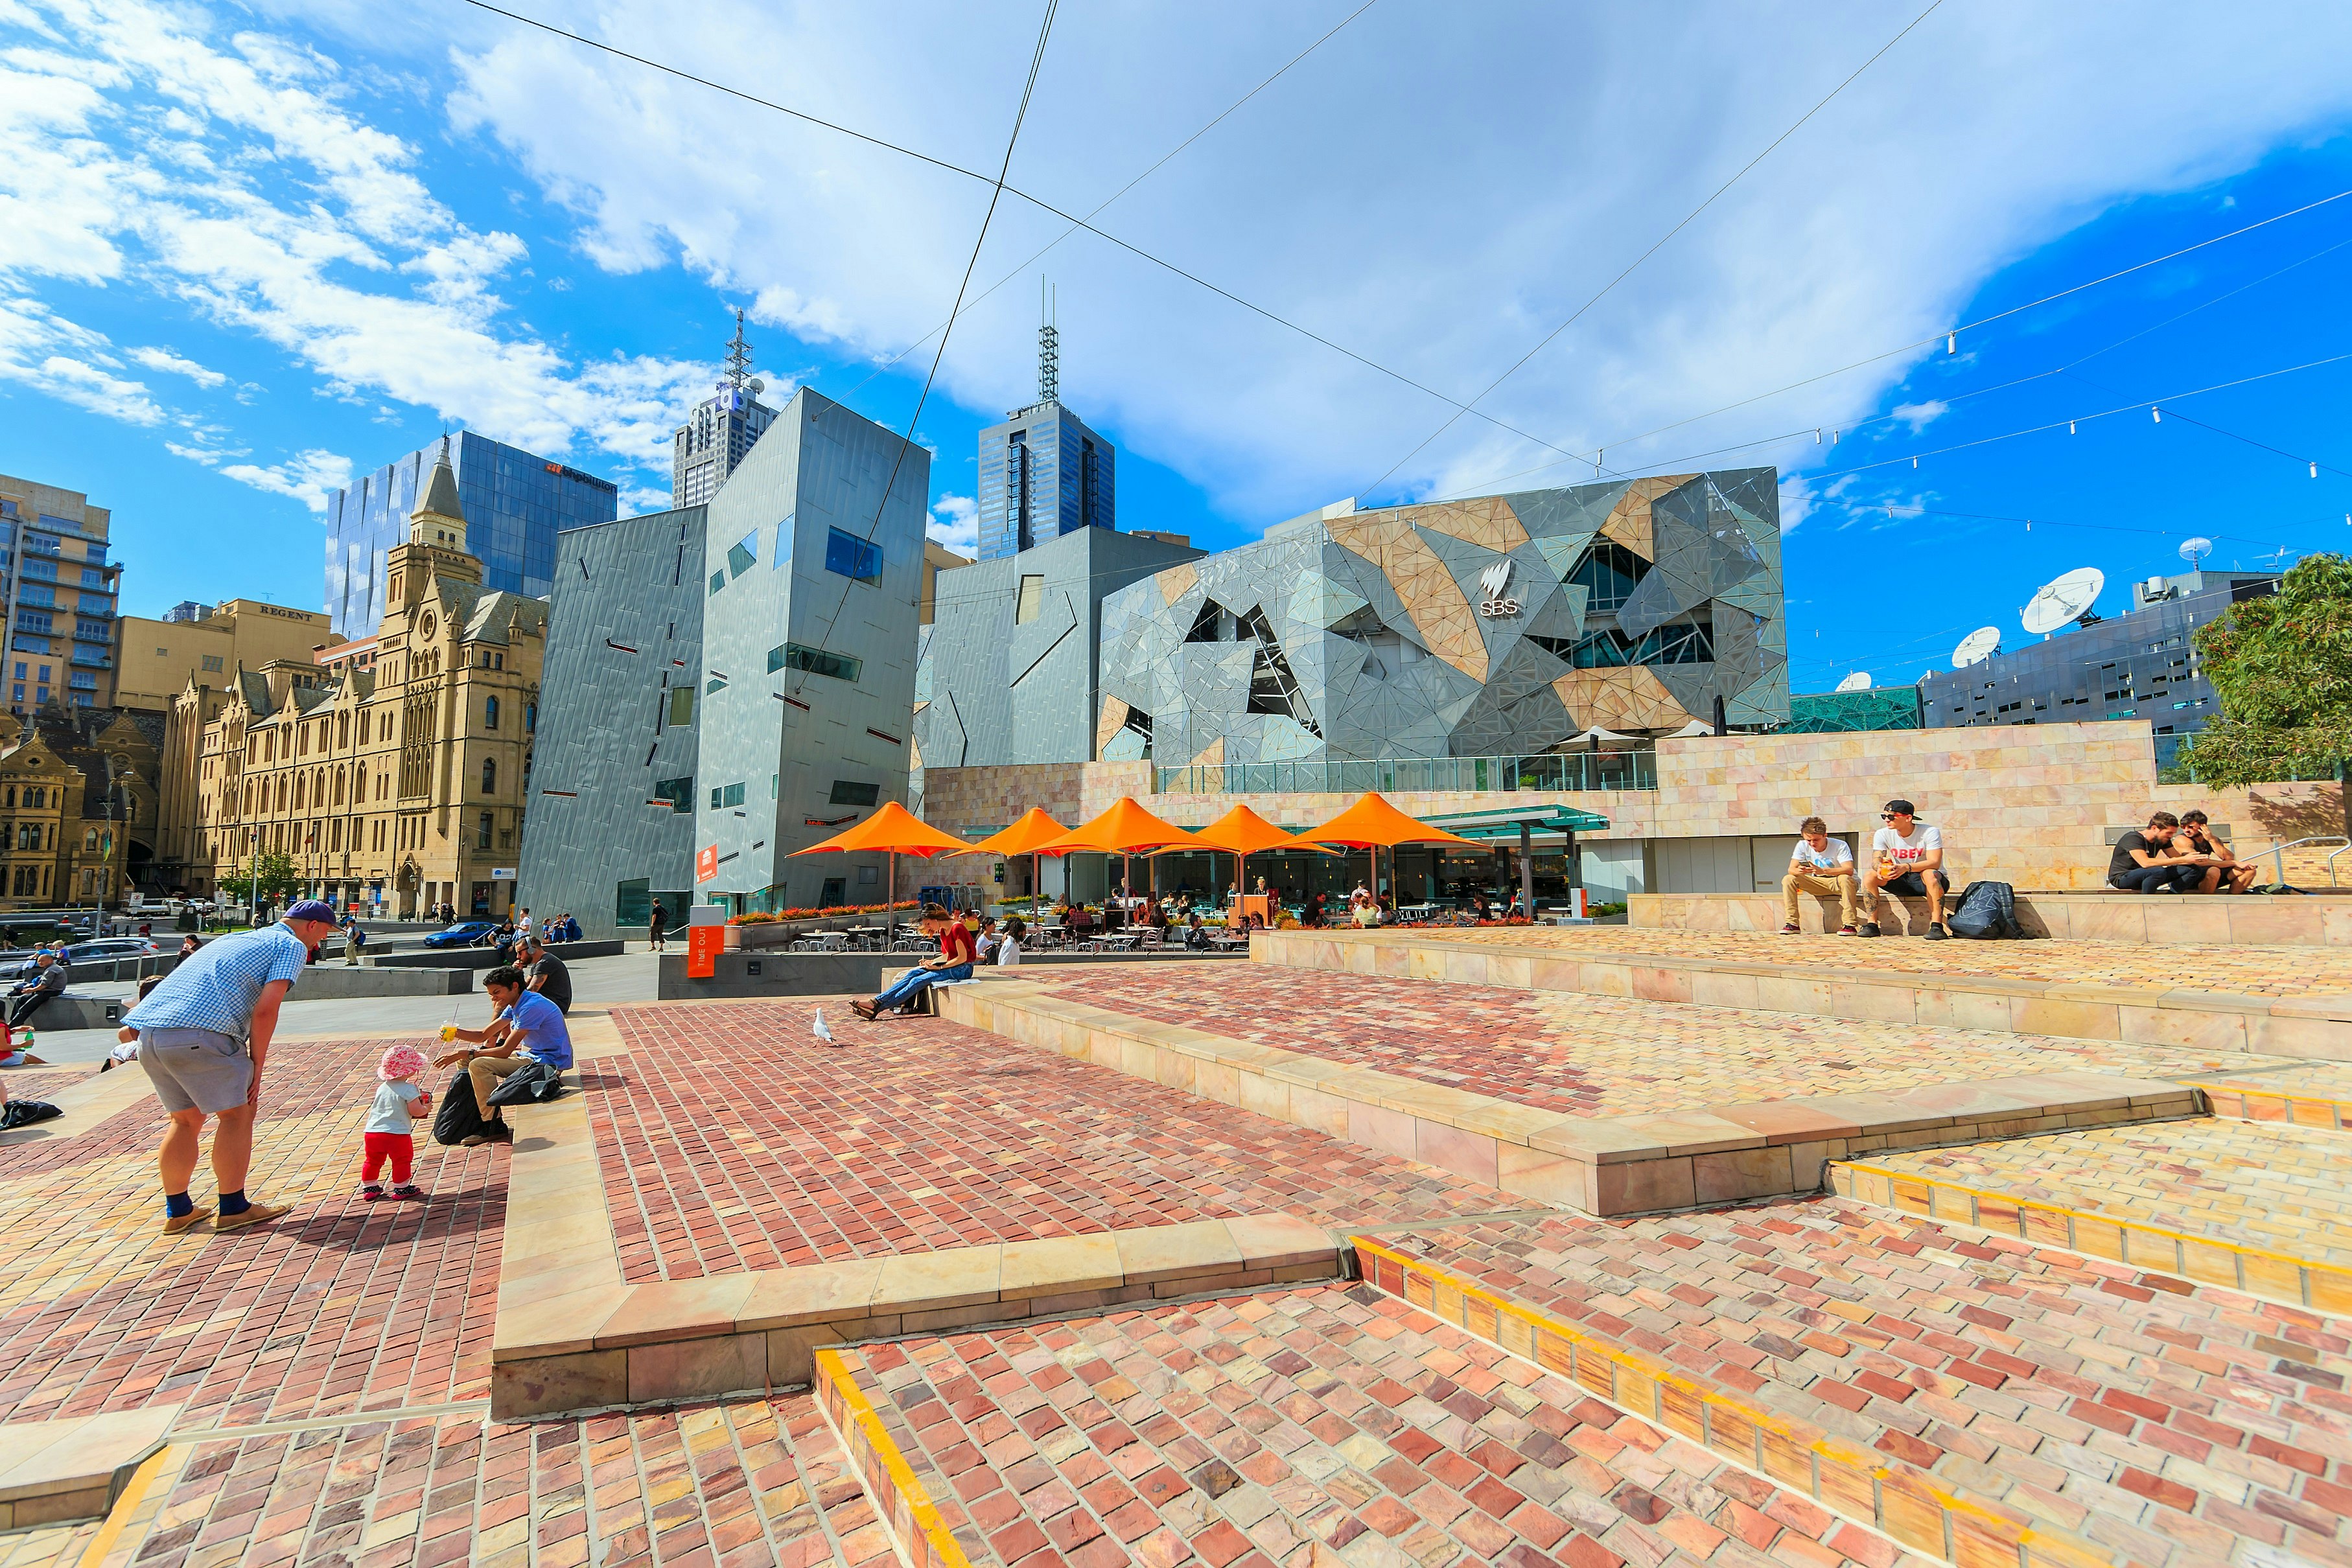 Federation Square in Melbourne, a mixed-use development in the inner city. Funky-looking buildings ring the square while many people converge on a large concrete structure in the centre, with space for sitting.